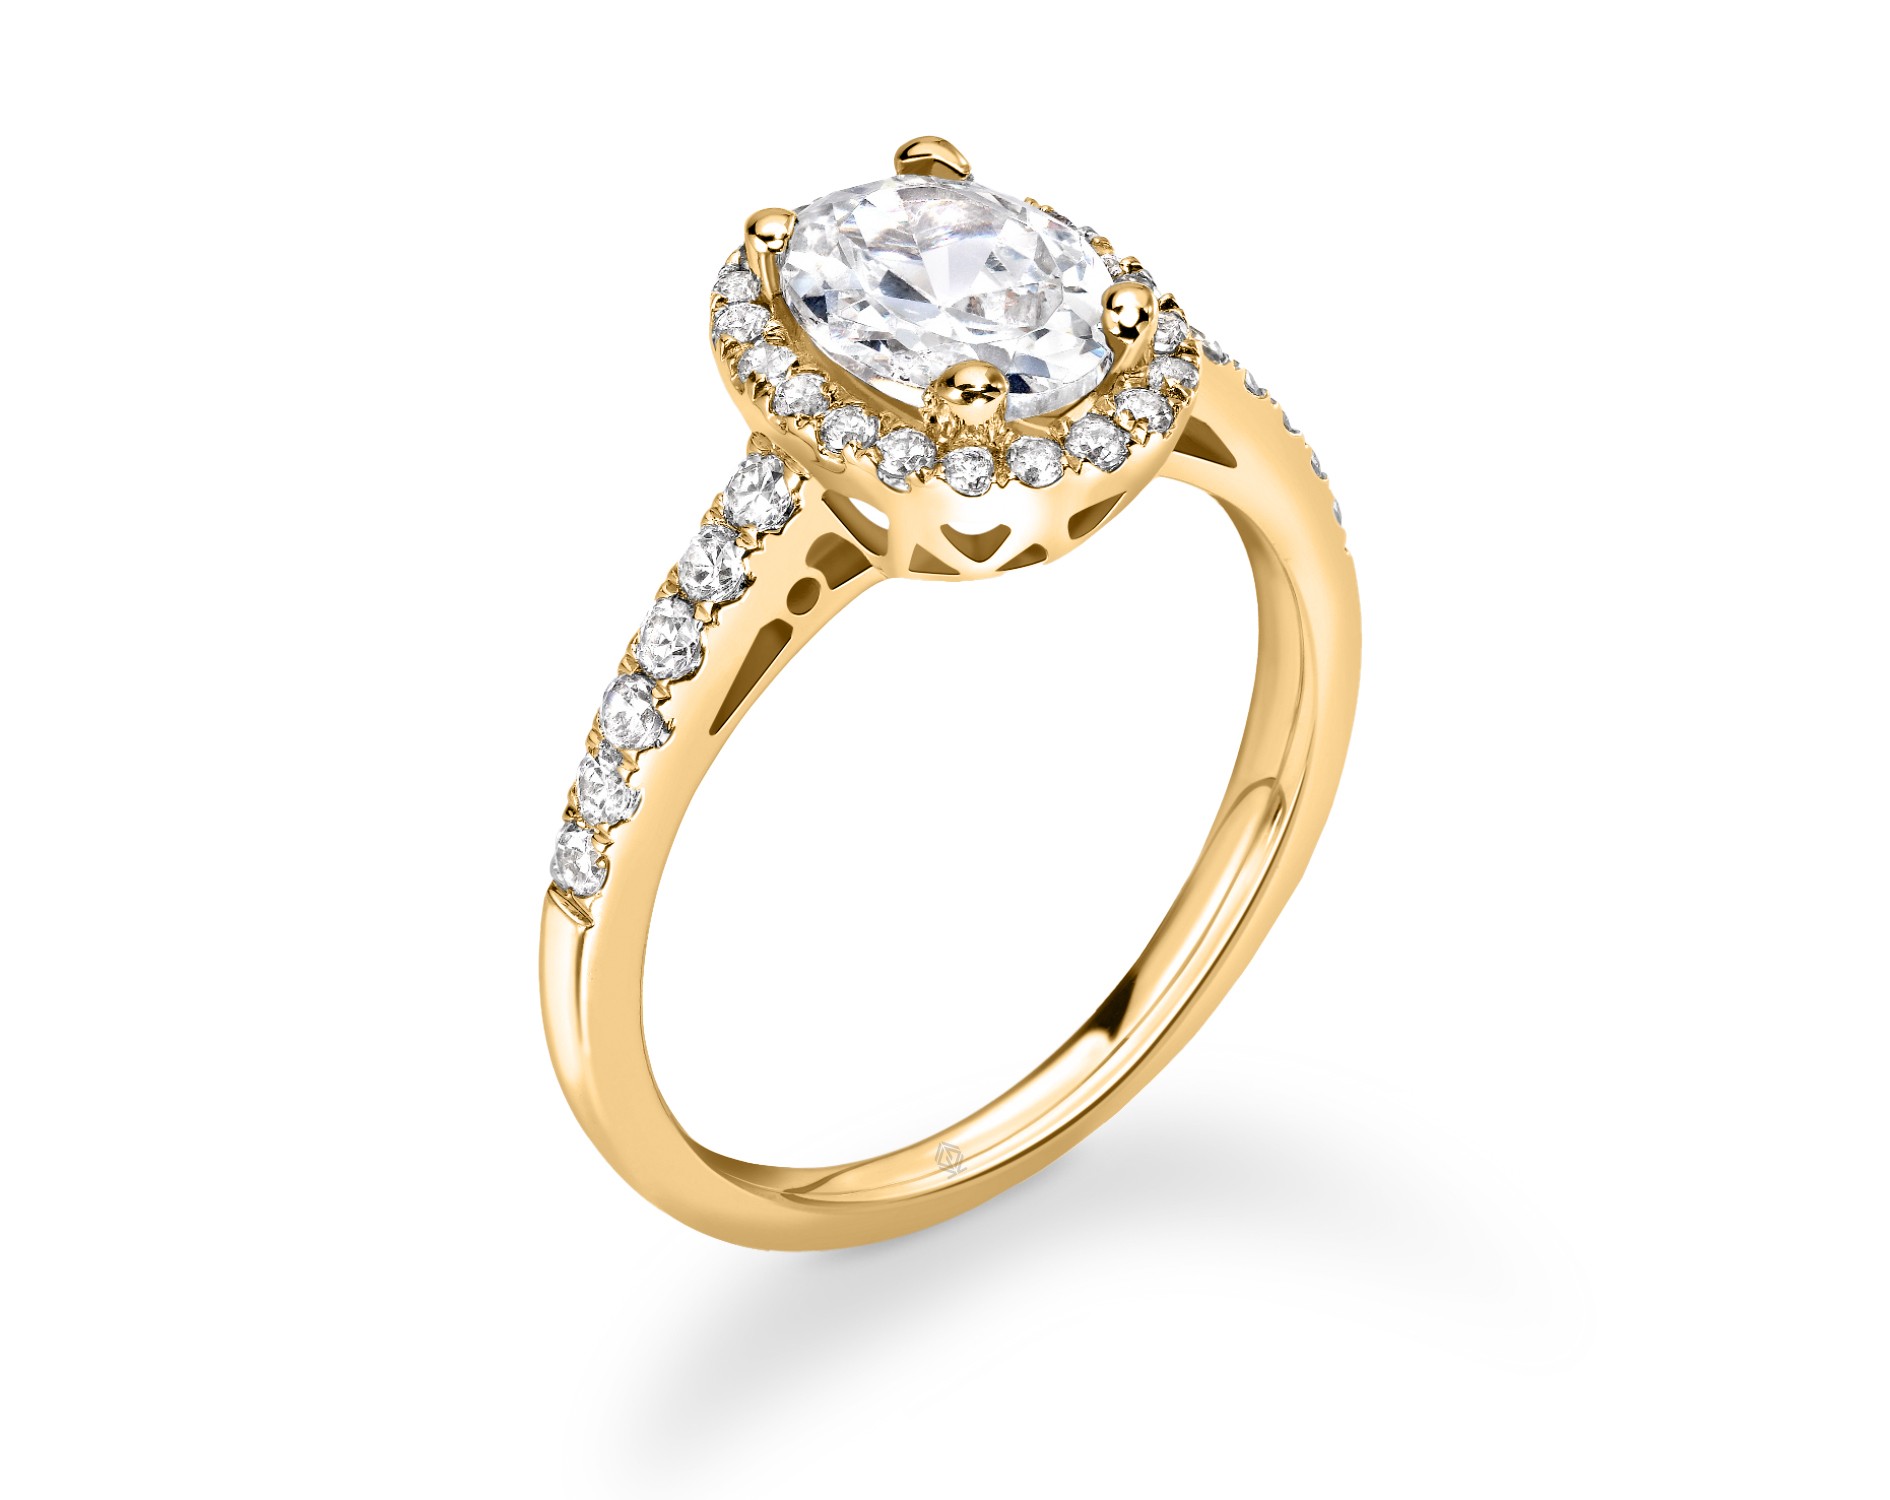 18K YELLOW GOLD OVAL CUT HALO DIAMOND RING WITH SIDE STONES PAVE SET